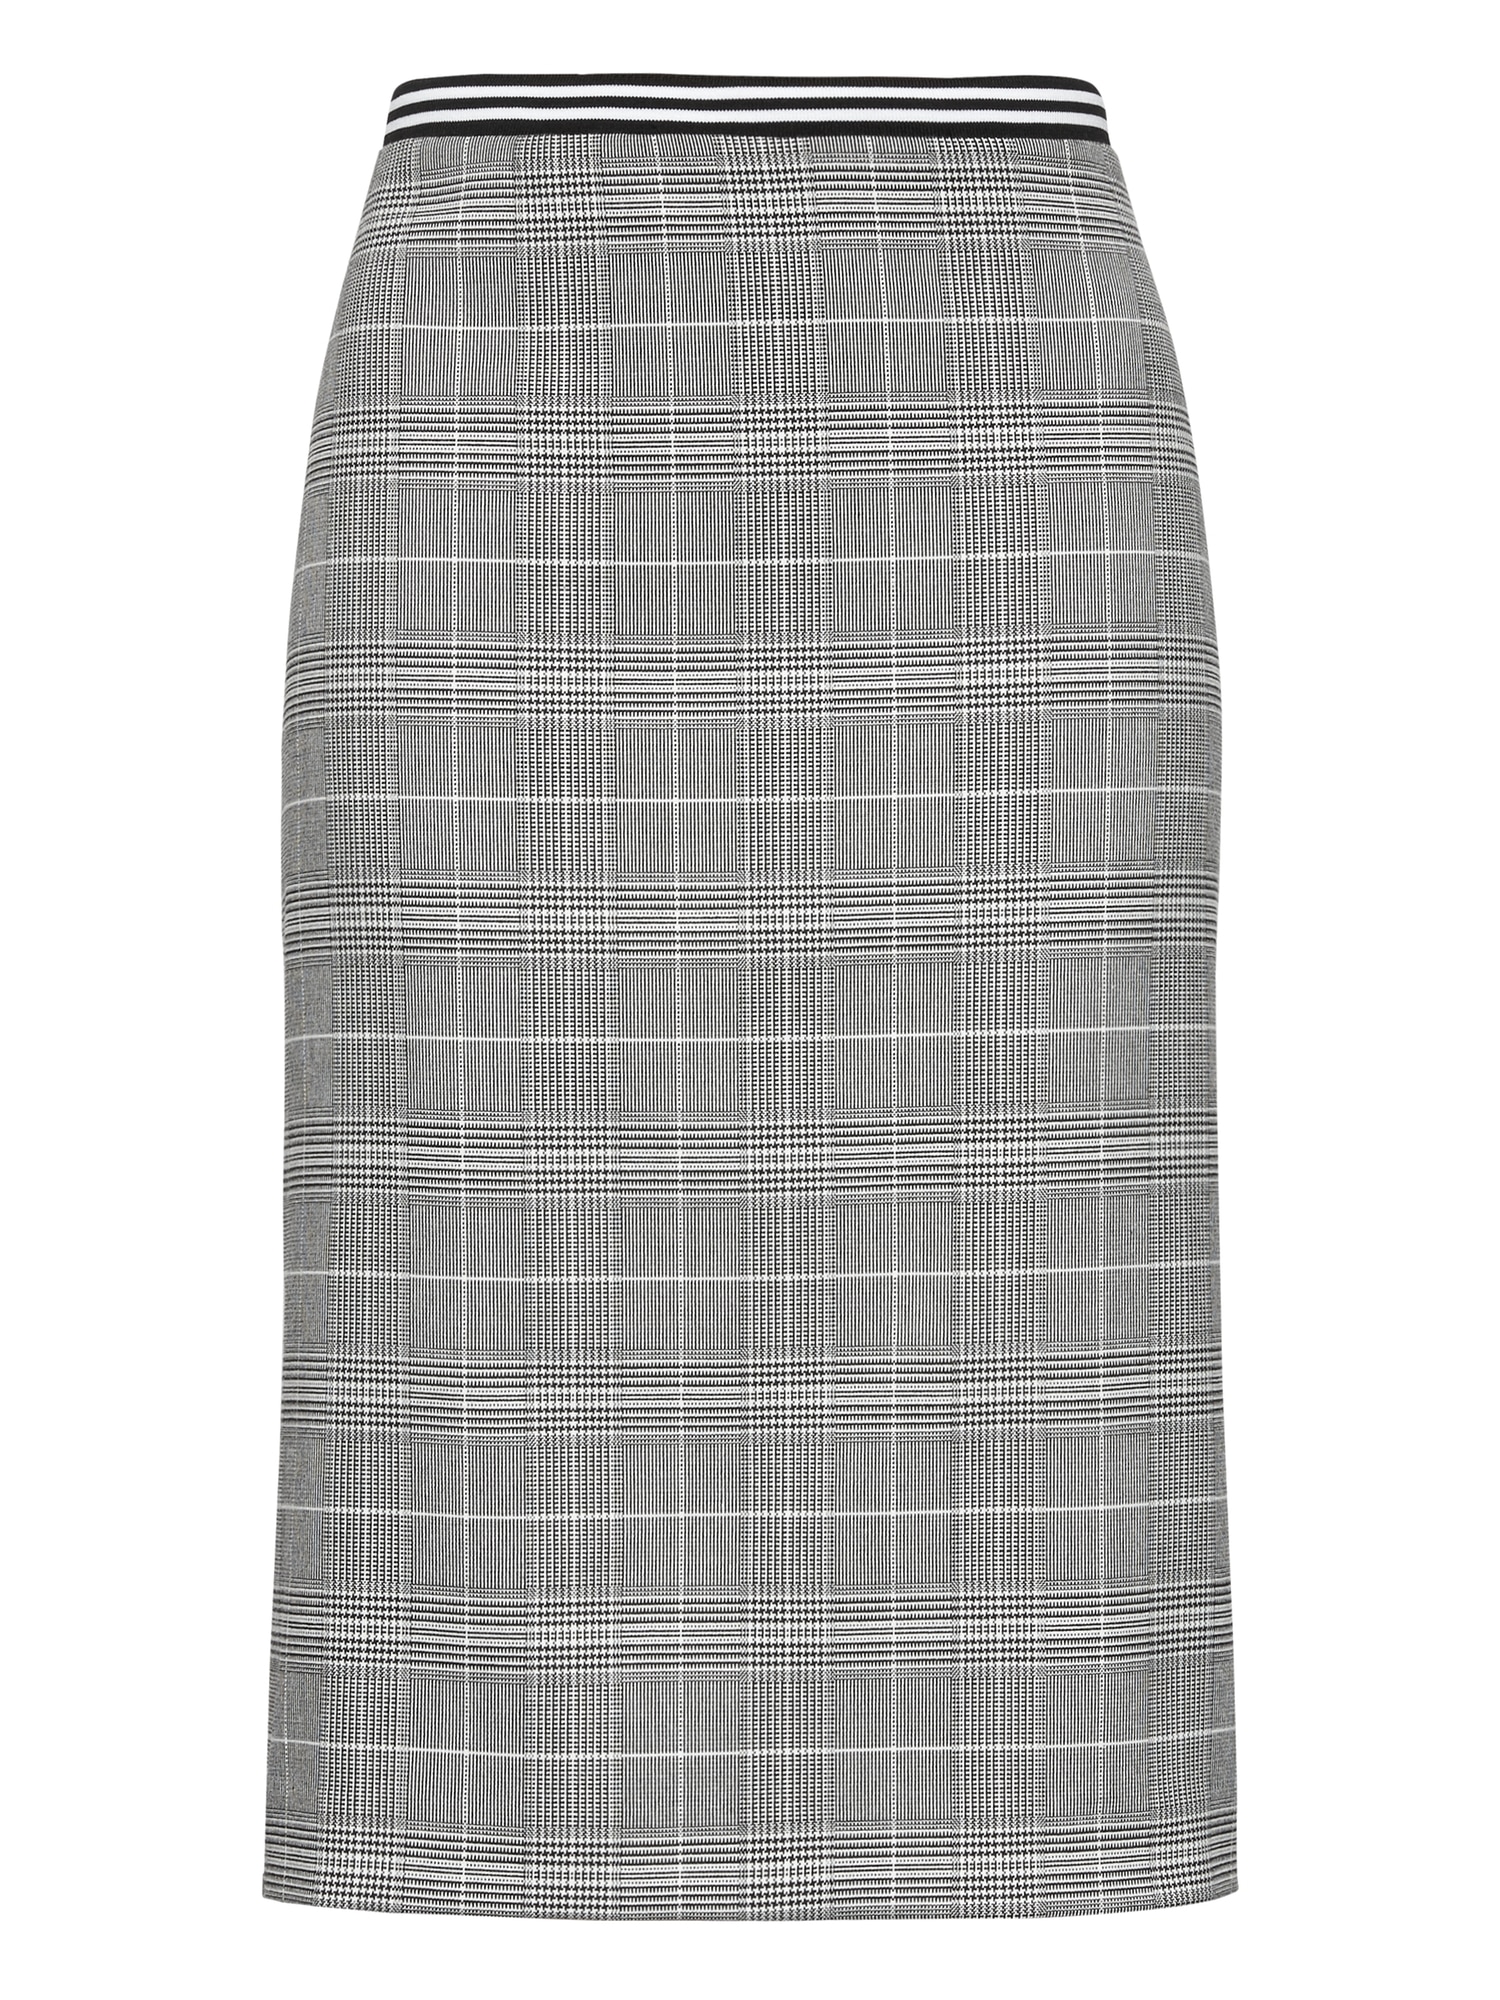 Plaid Pencil Skirt with Vented Sides | Banana Republic